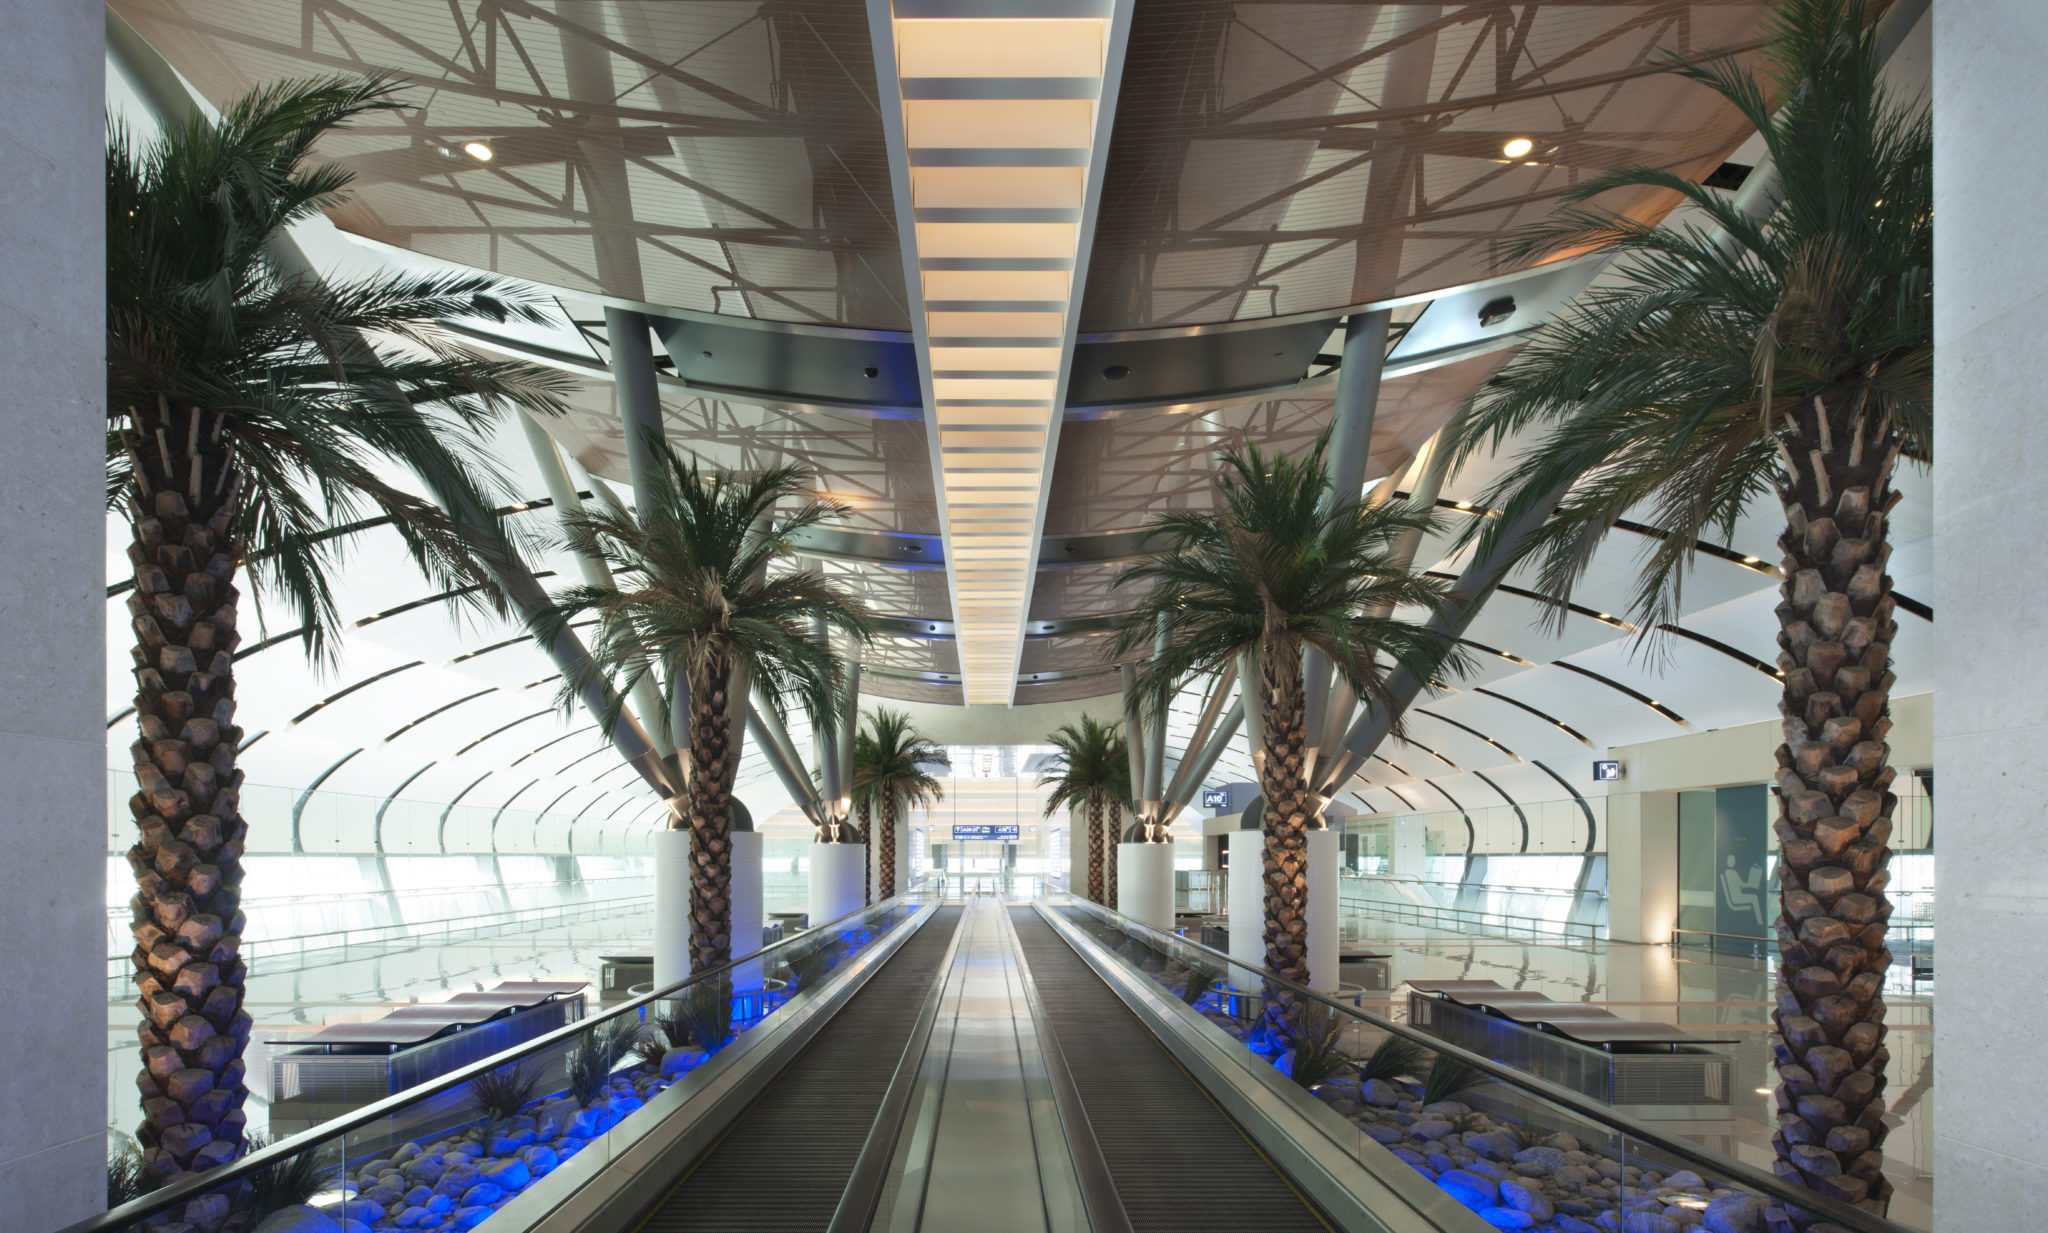 Bespoke SAS metalwork and ceilings for new Muscat airport